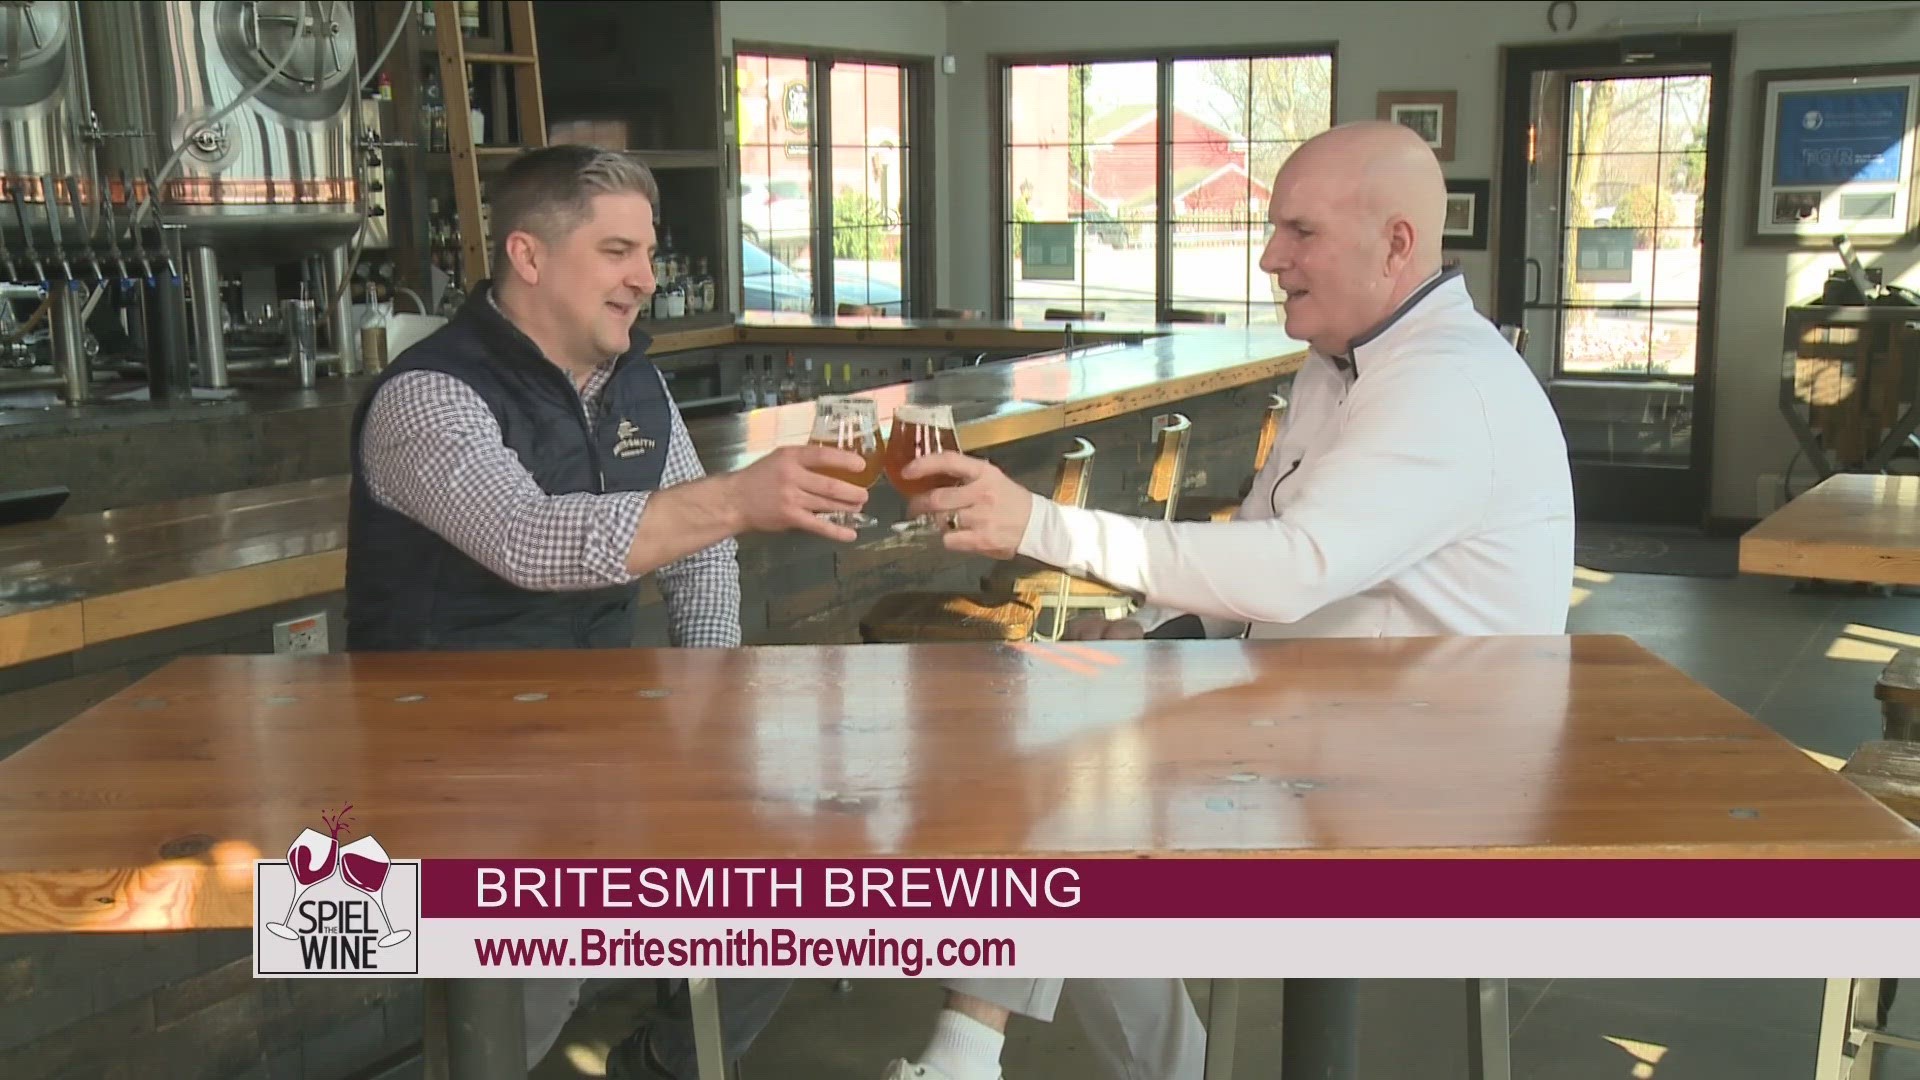 Spiel the Wine -- April 29 -- Segment 3 THIS VIDEO IS SPONSORED BY BRITESMITH BREWING